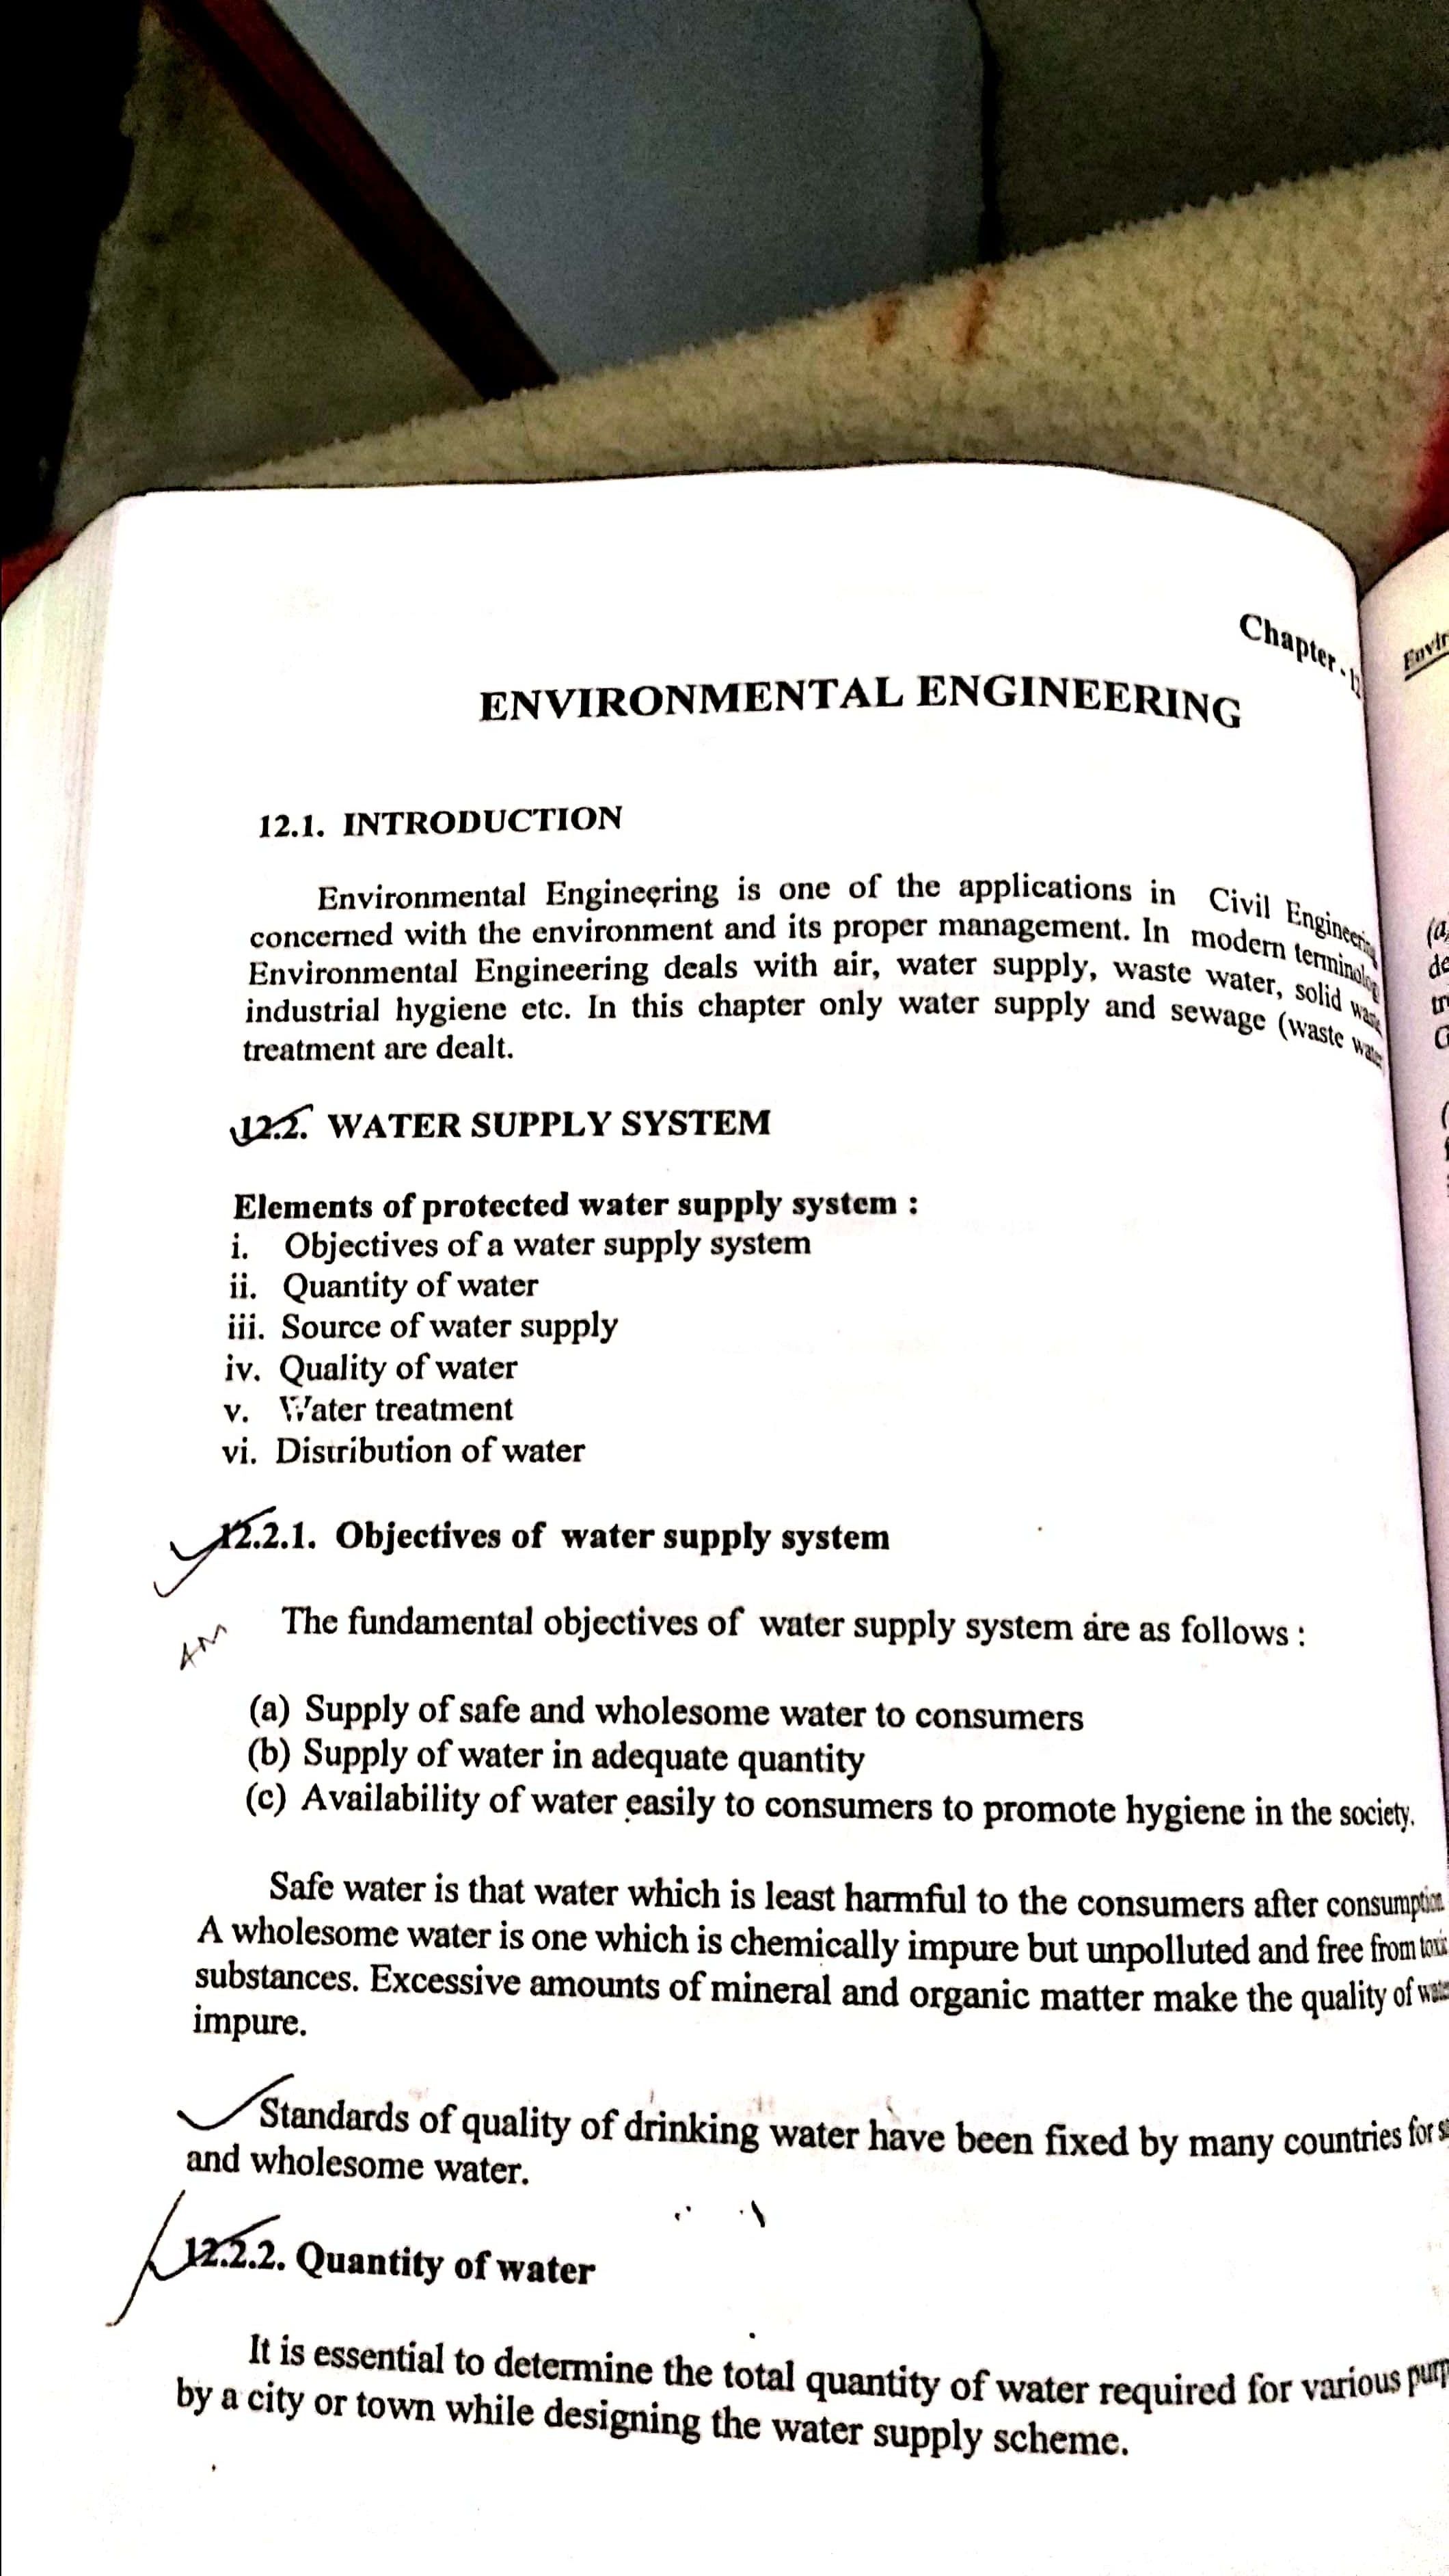 ENVIRONMENT ENGINEERING And Quality of Water -New Doc 2019-11-30 20.41.41_76.jpg